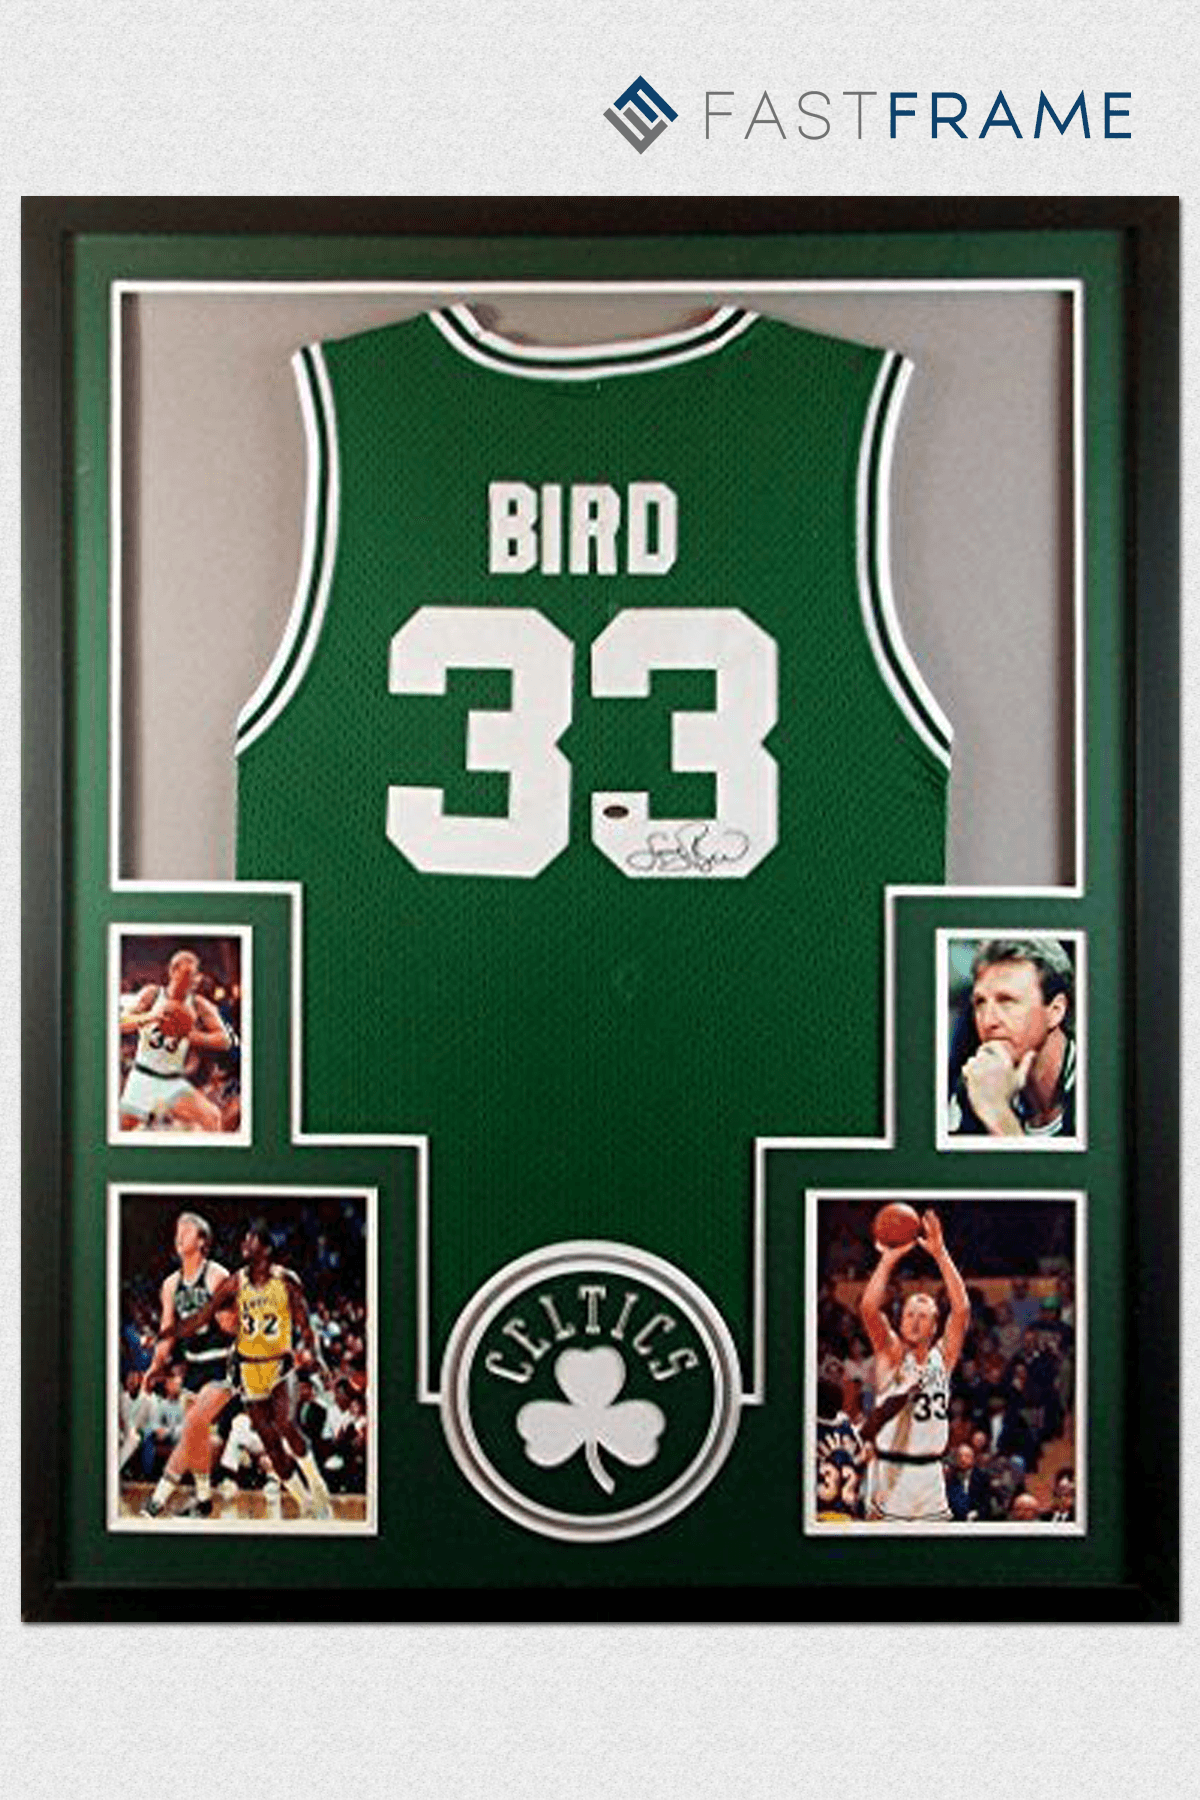 jersey frame with photo